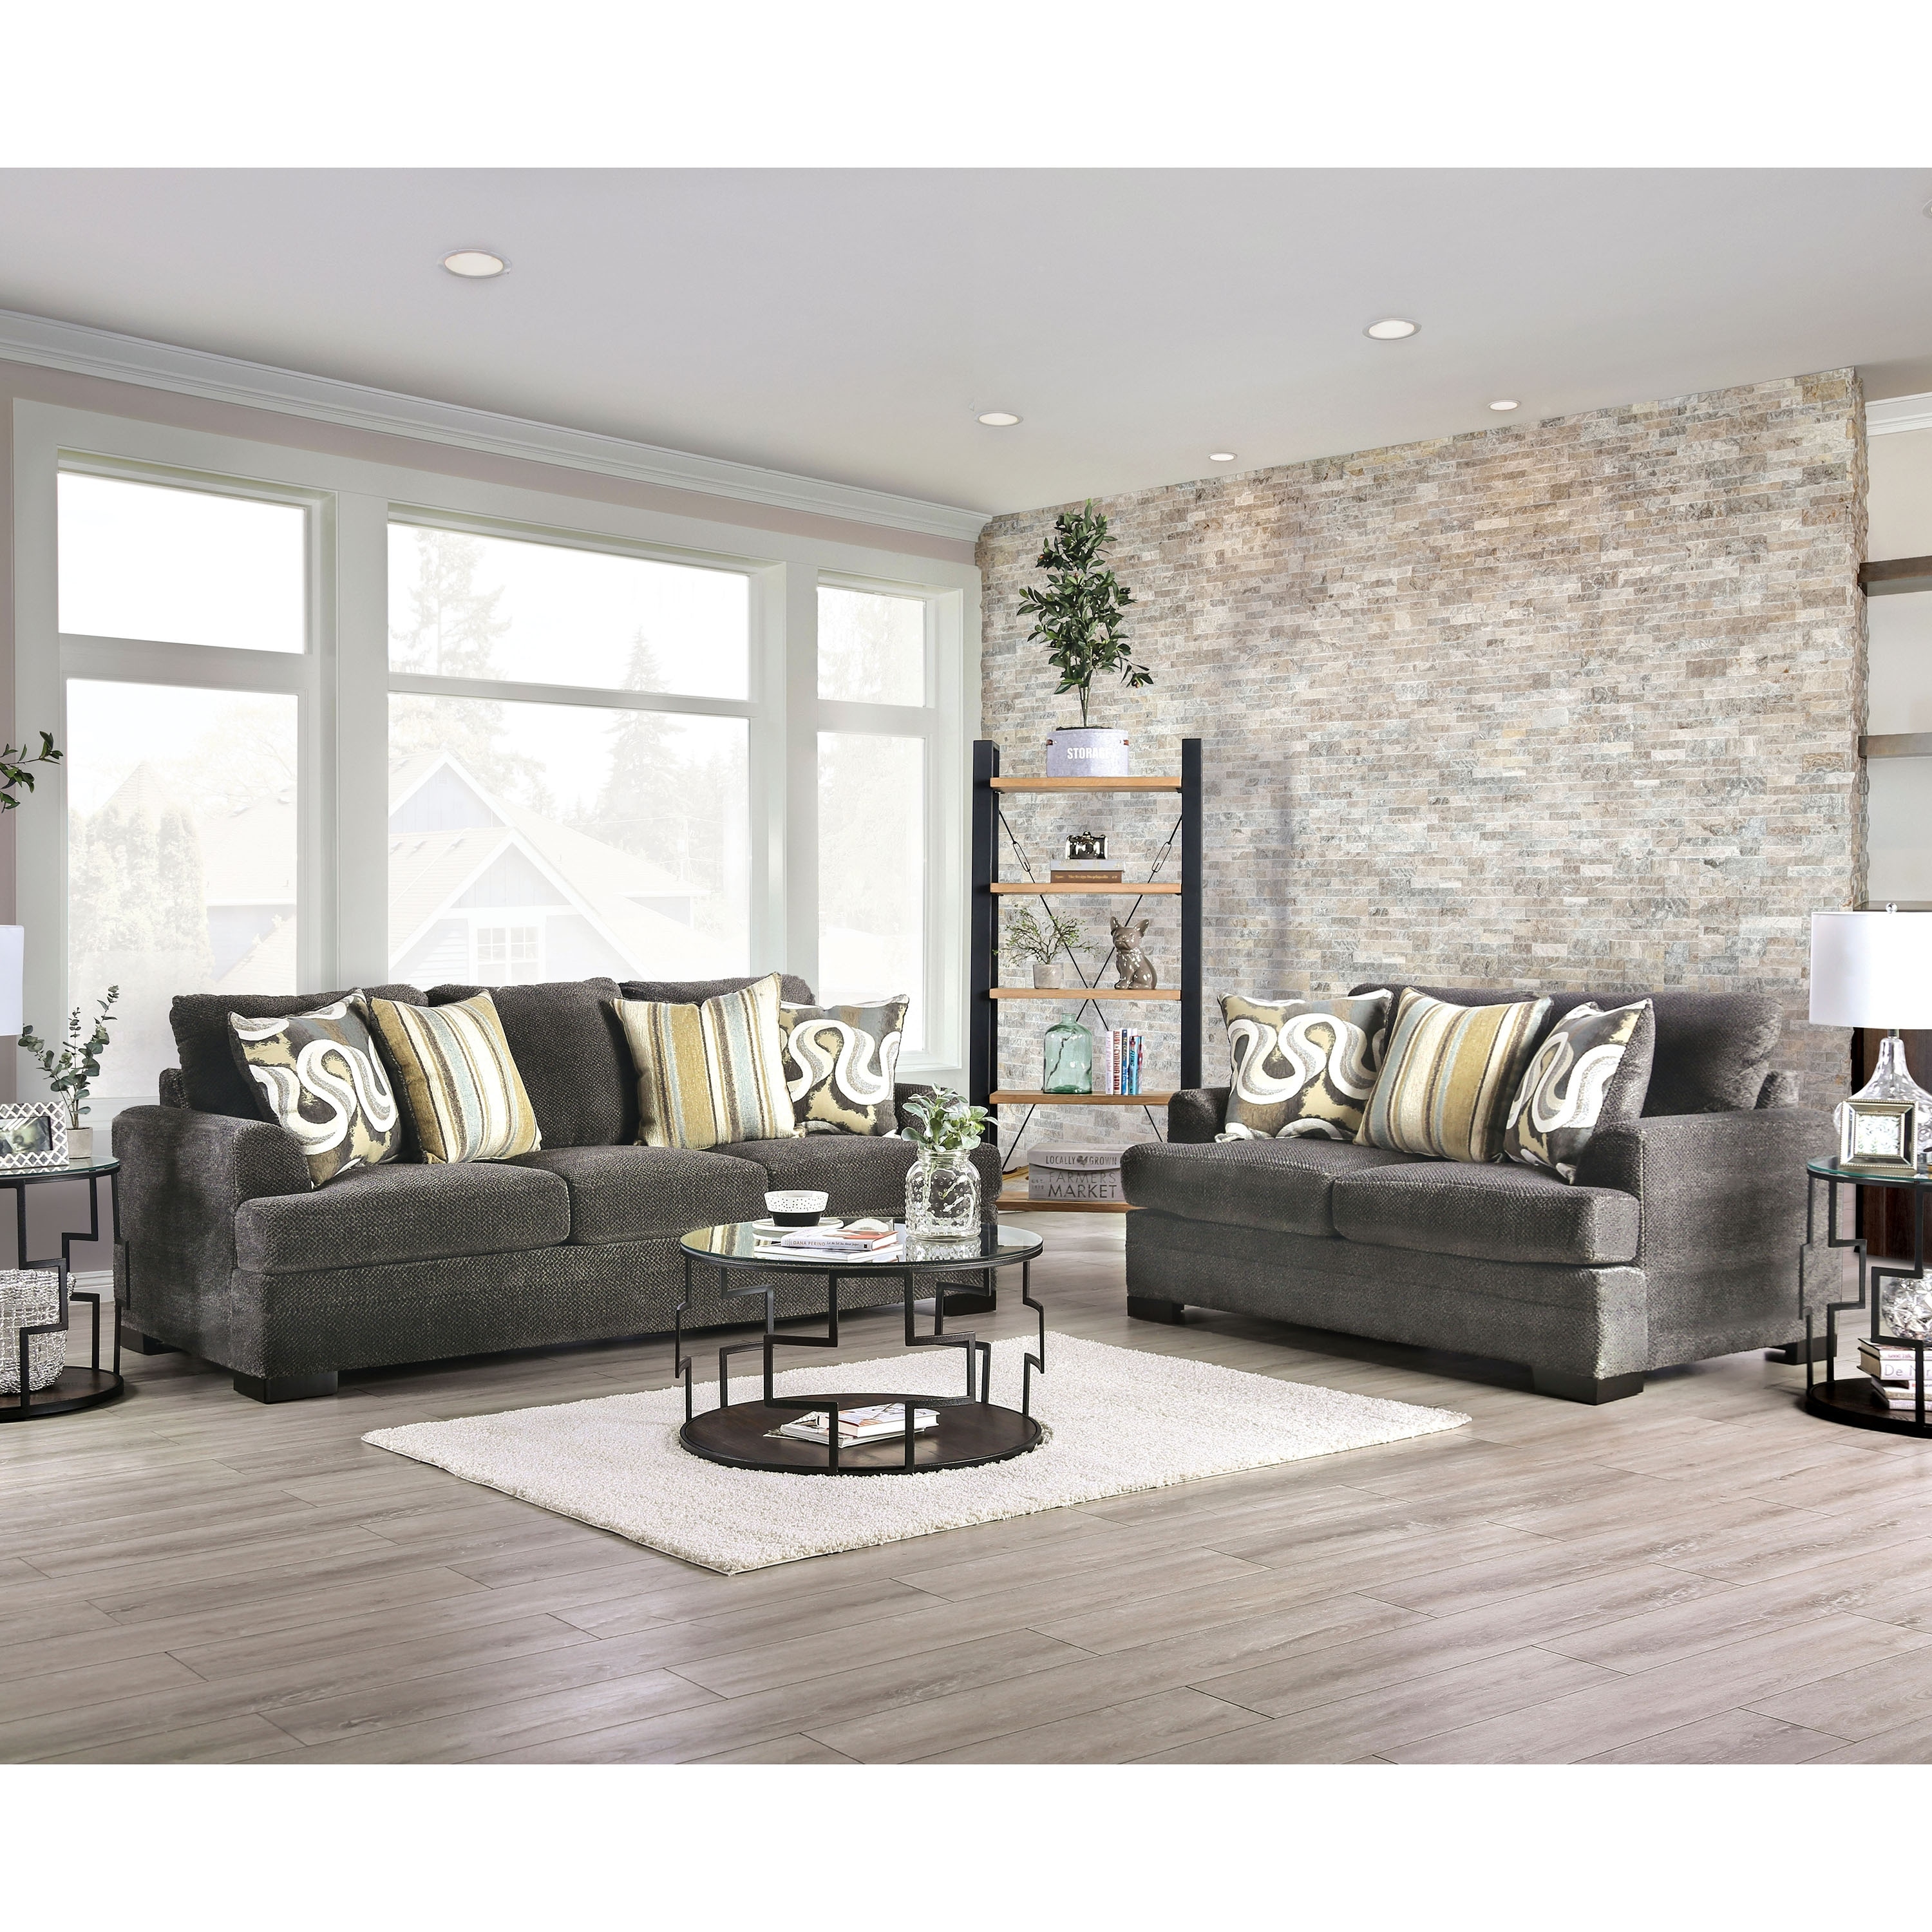 Furniture Of America Klio Transitional Chenille 2 Piece Living Room Set On Sale Overstock 31470880